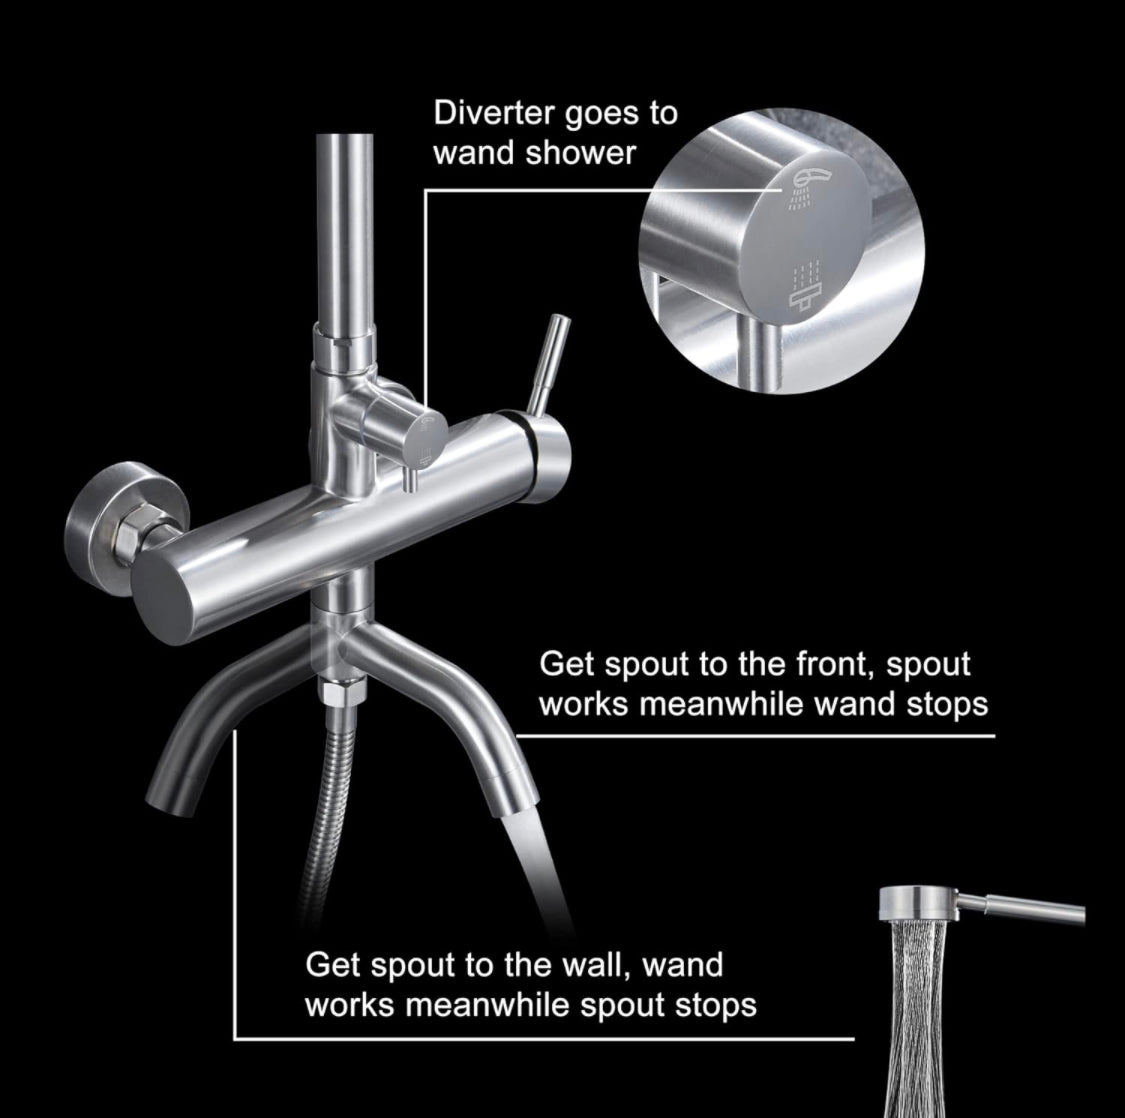 FOROUTE Shower Faucet - Shower Faucets Sets Complete, Shower System - Outdoor Shower Kit/Outdoor Shower Enclosure/Outdoor Shower Fixtures W/Shower Head with Handheld High Pressure, Brushed Nickel